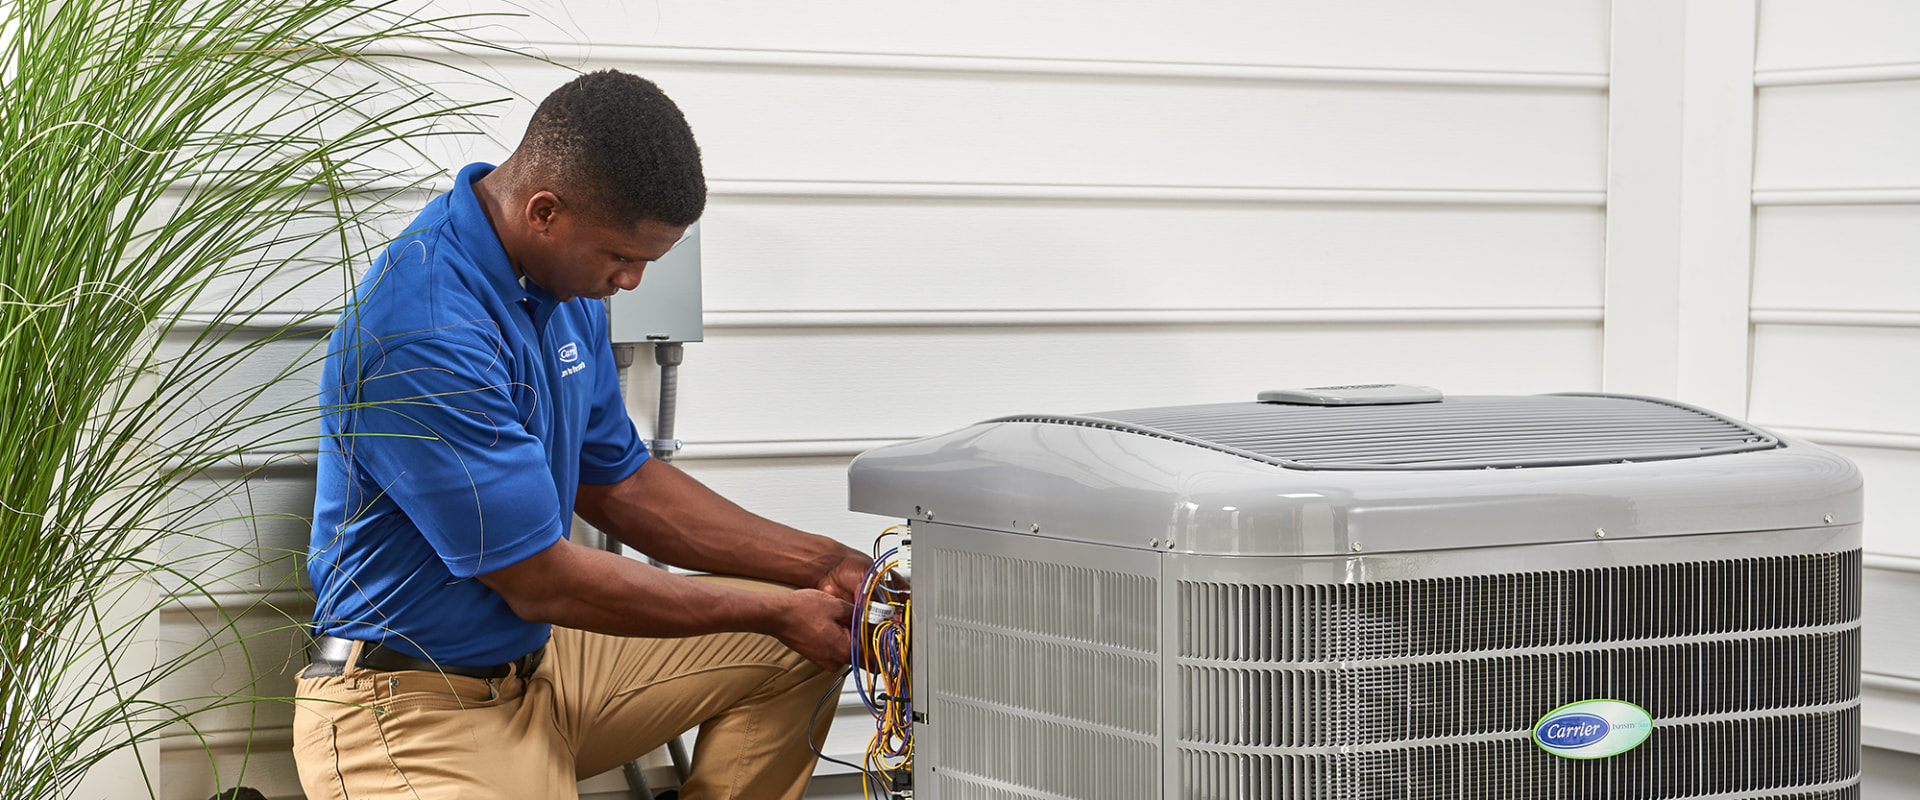 The Lifespan of an Air Conditioner: What You Need to Know